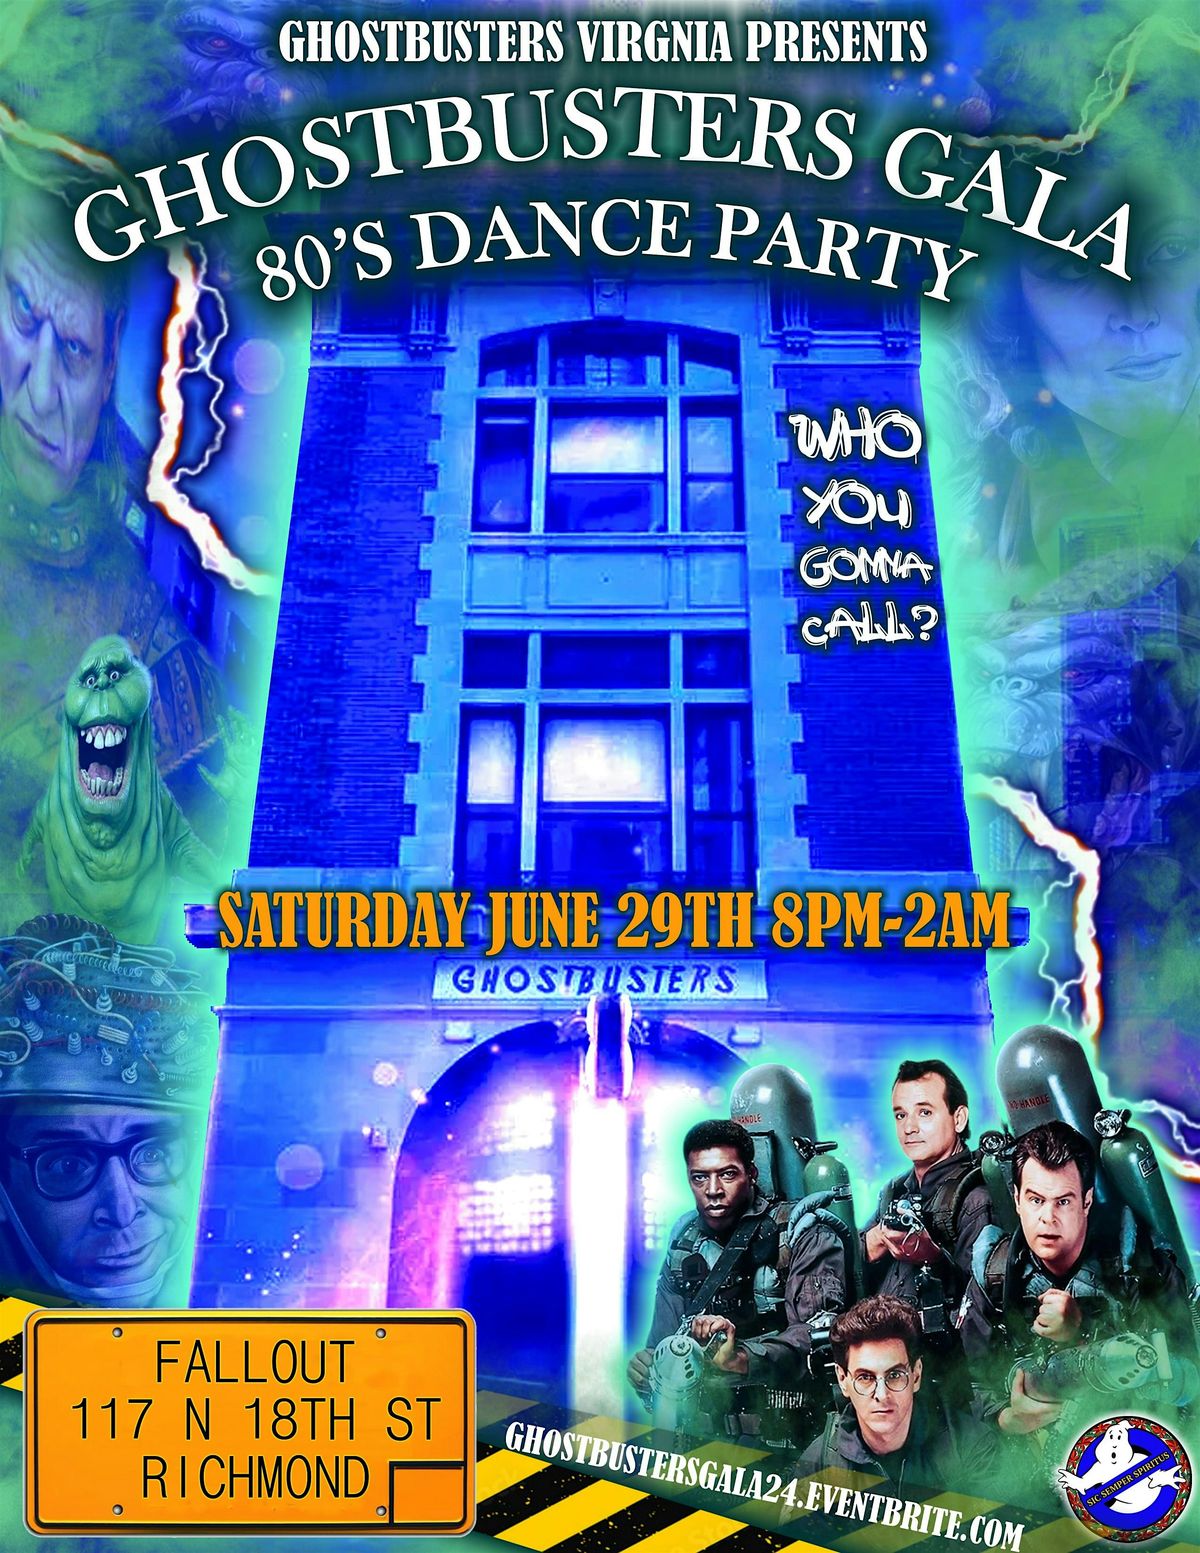 Ghostbusters Gala: 80's Dance Party